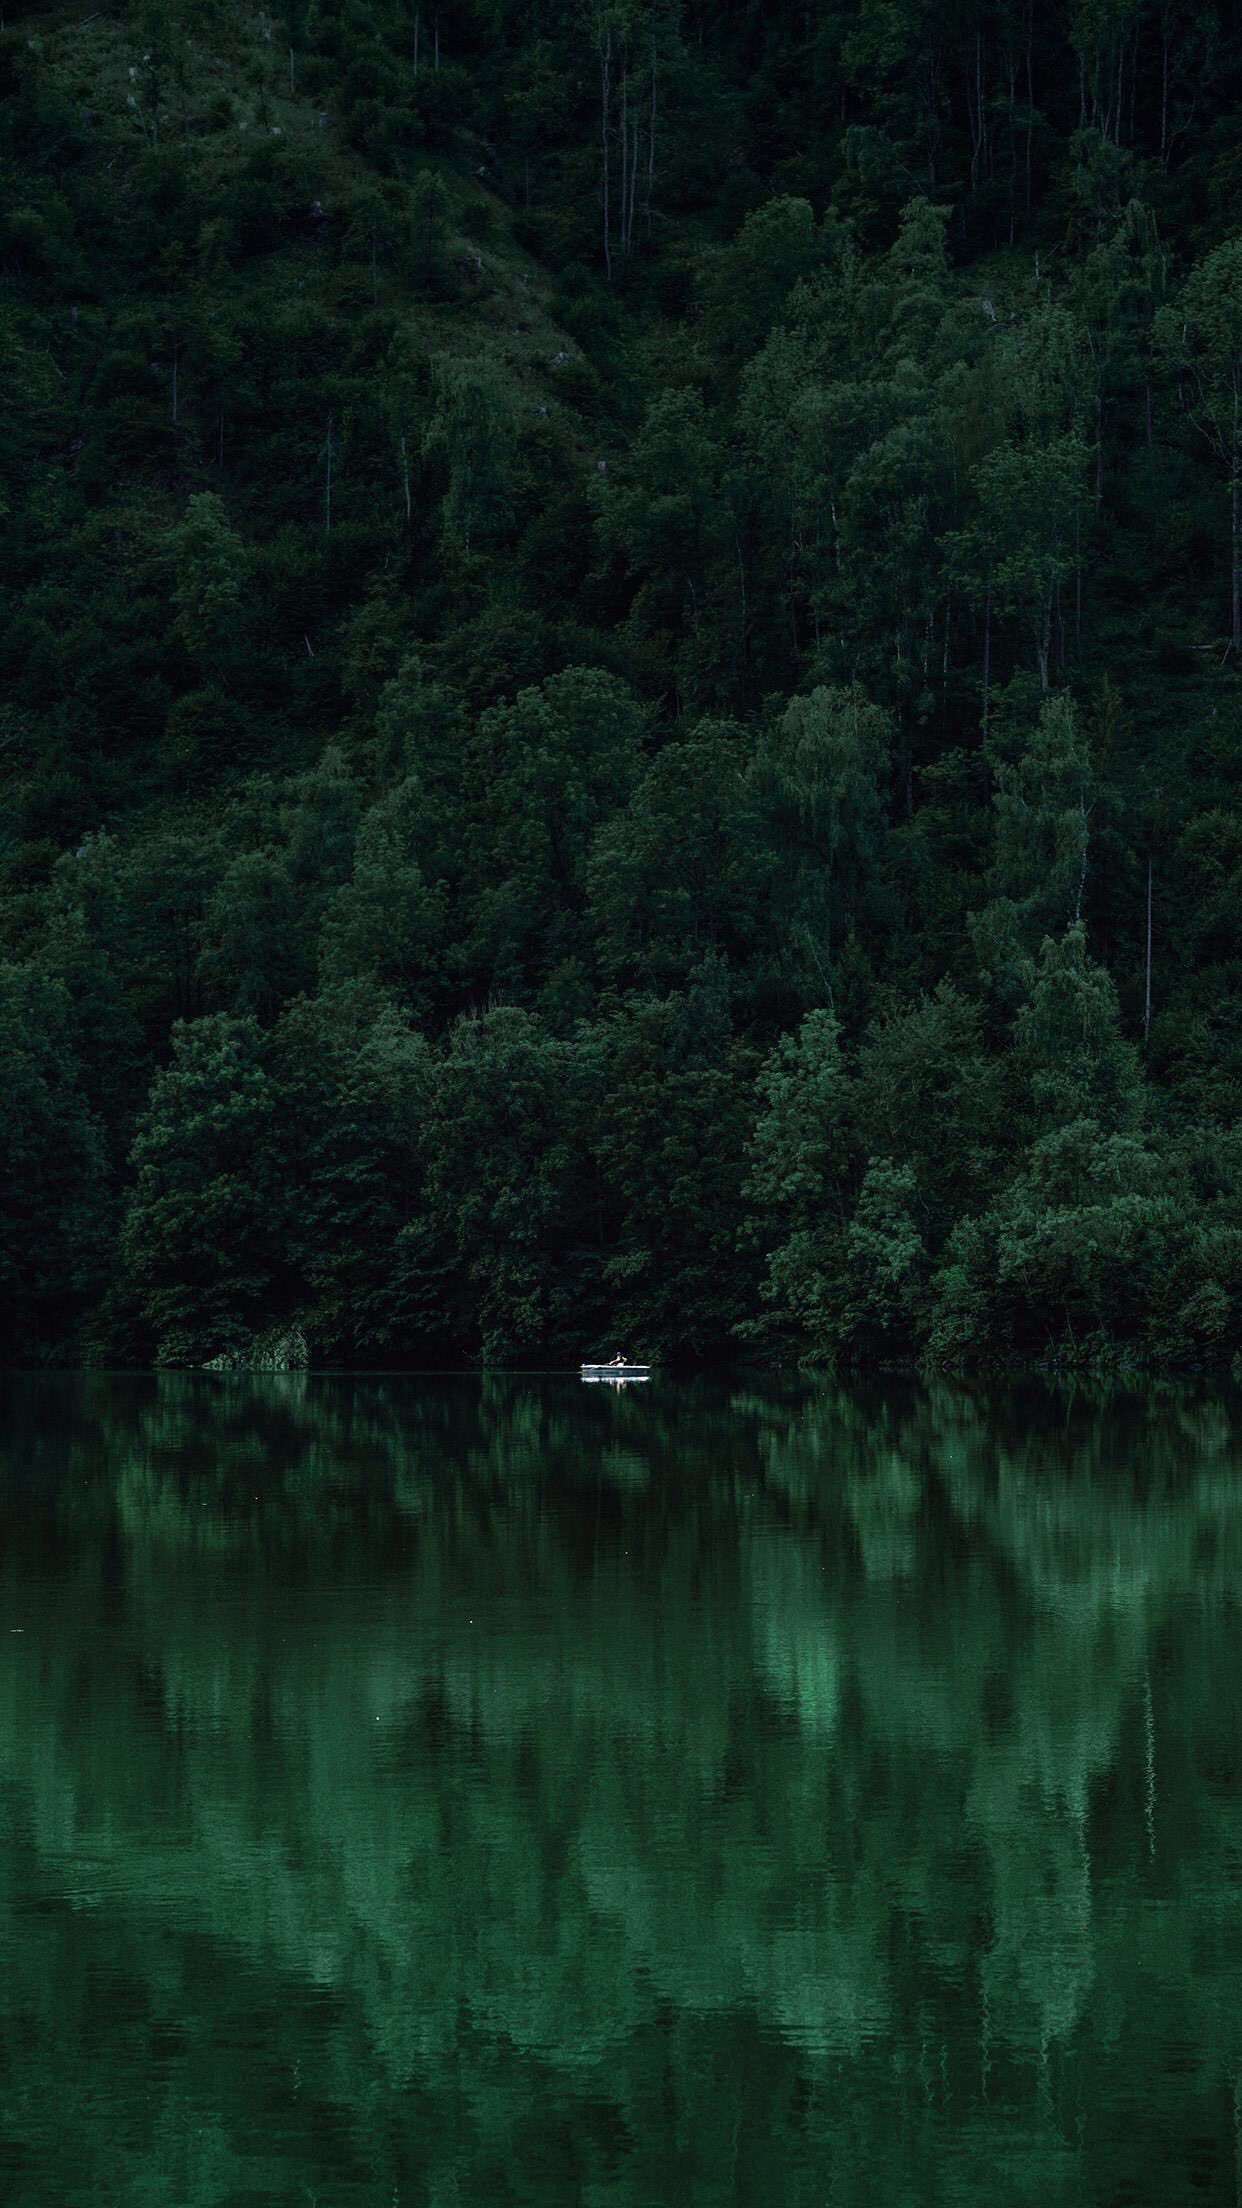 A boat on a lake surrounded by a dense forest - Lake